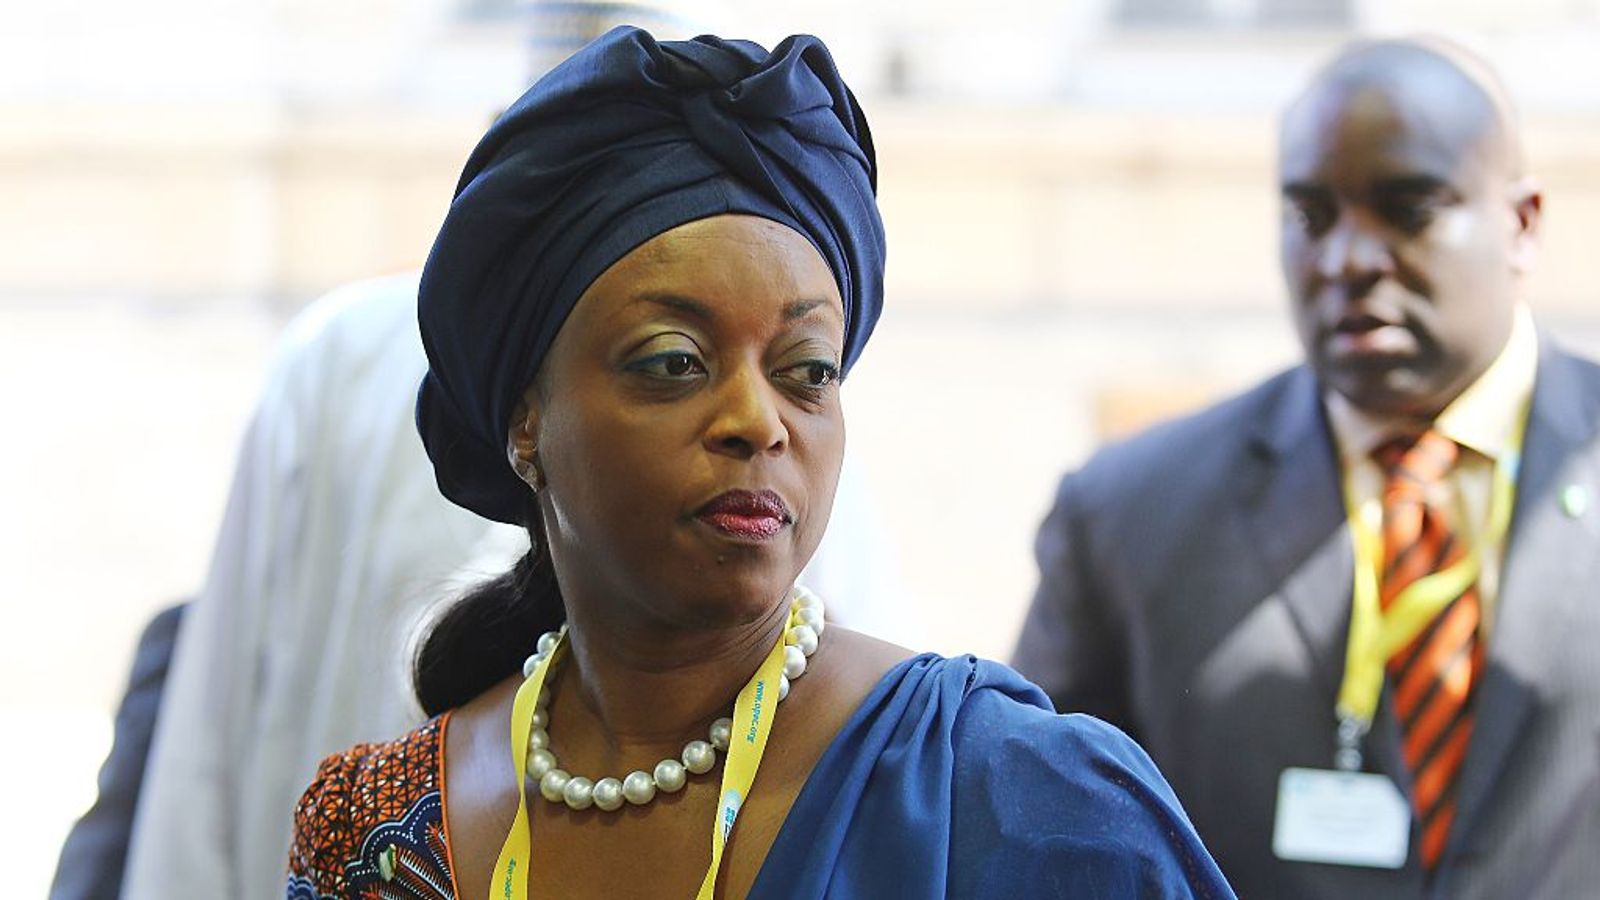 Ex-Petroleum Minister, Alison-Madueke faces bribery charges in UK